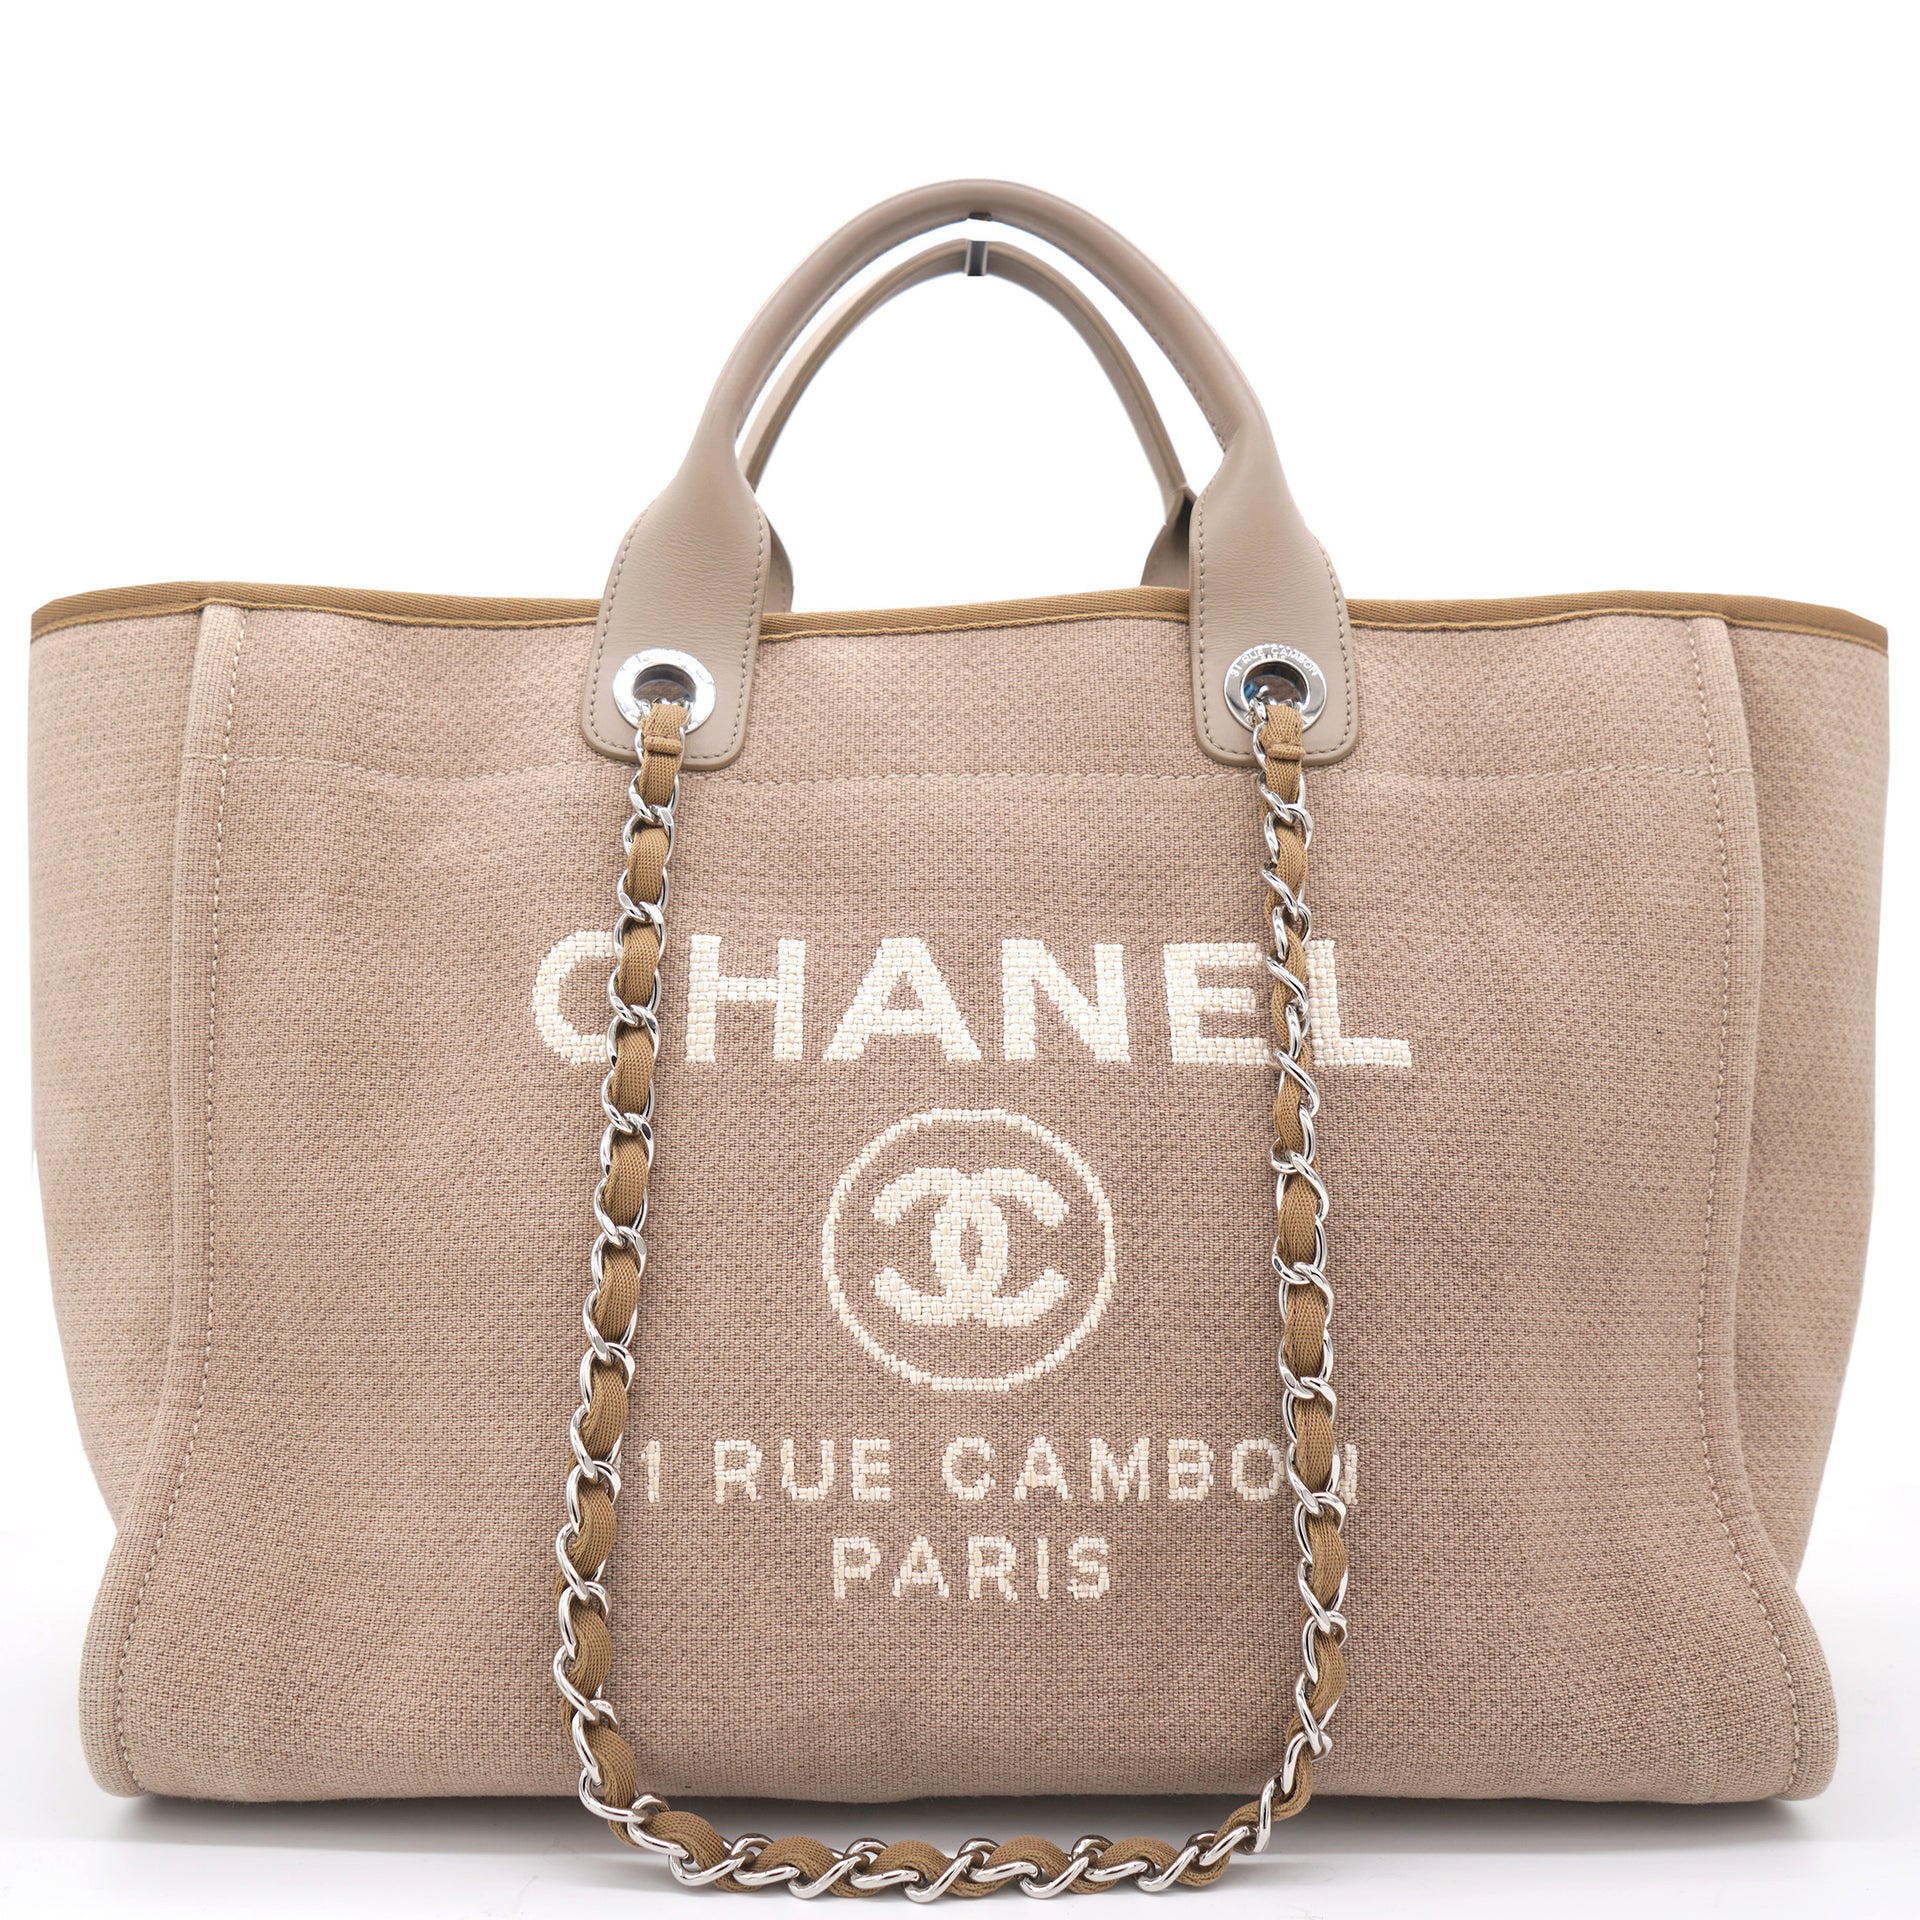 Australia Chanel Bag Price List Reference Guide  Spotted Fashion